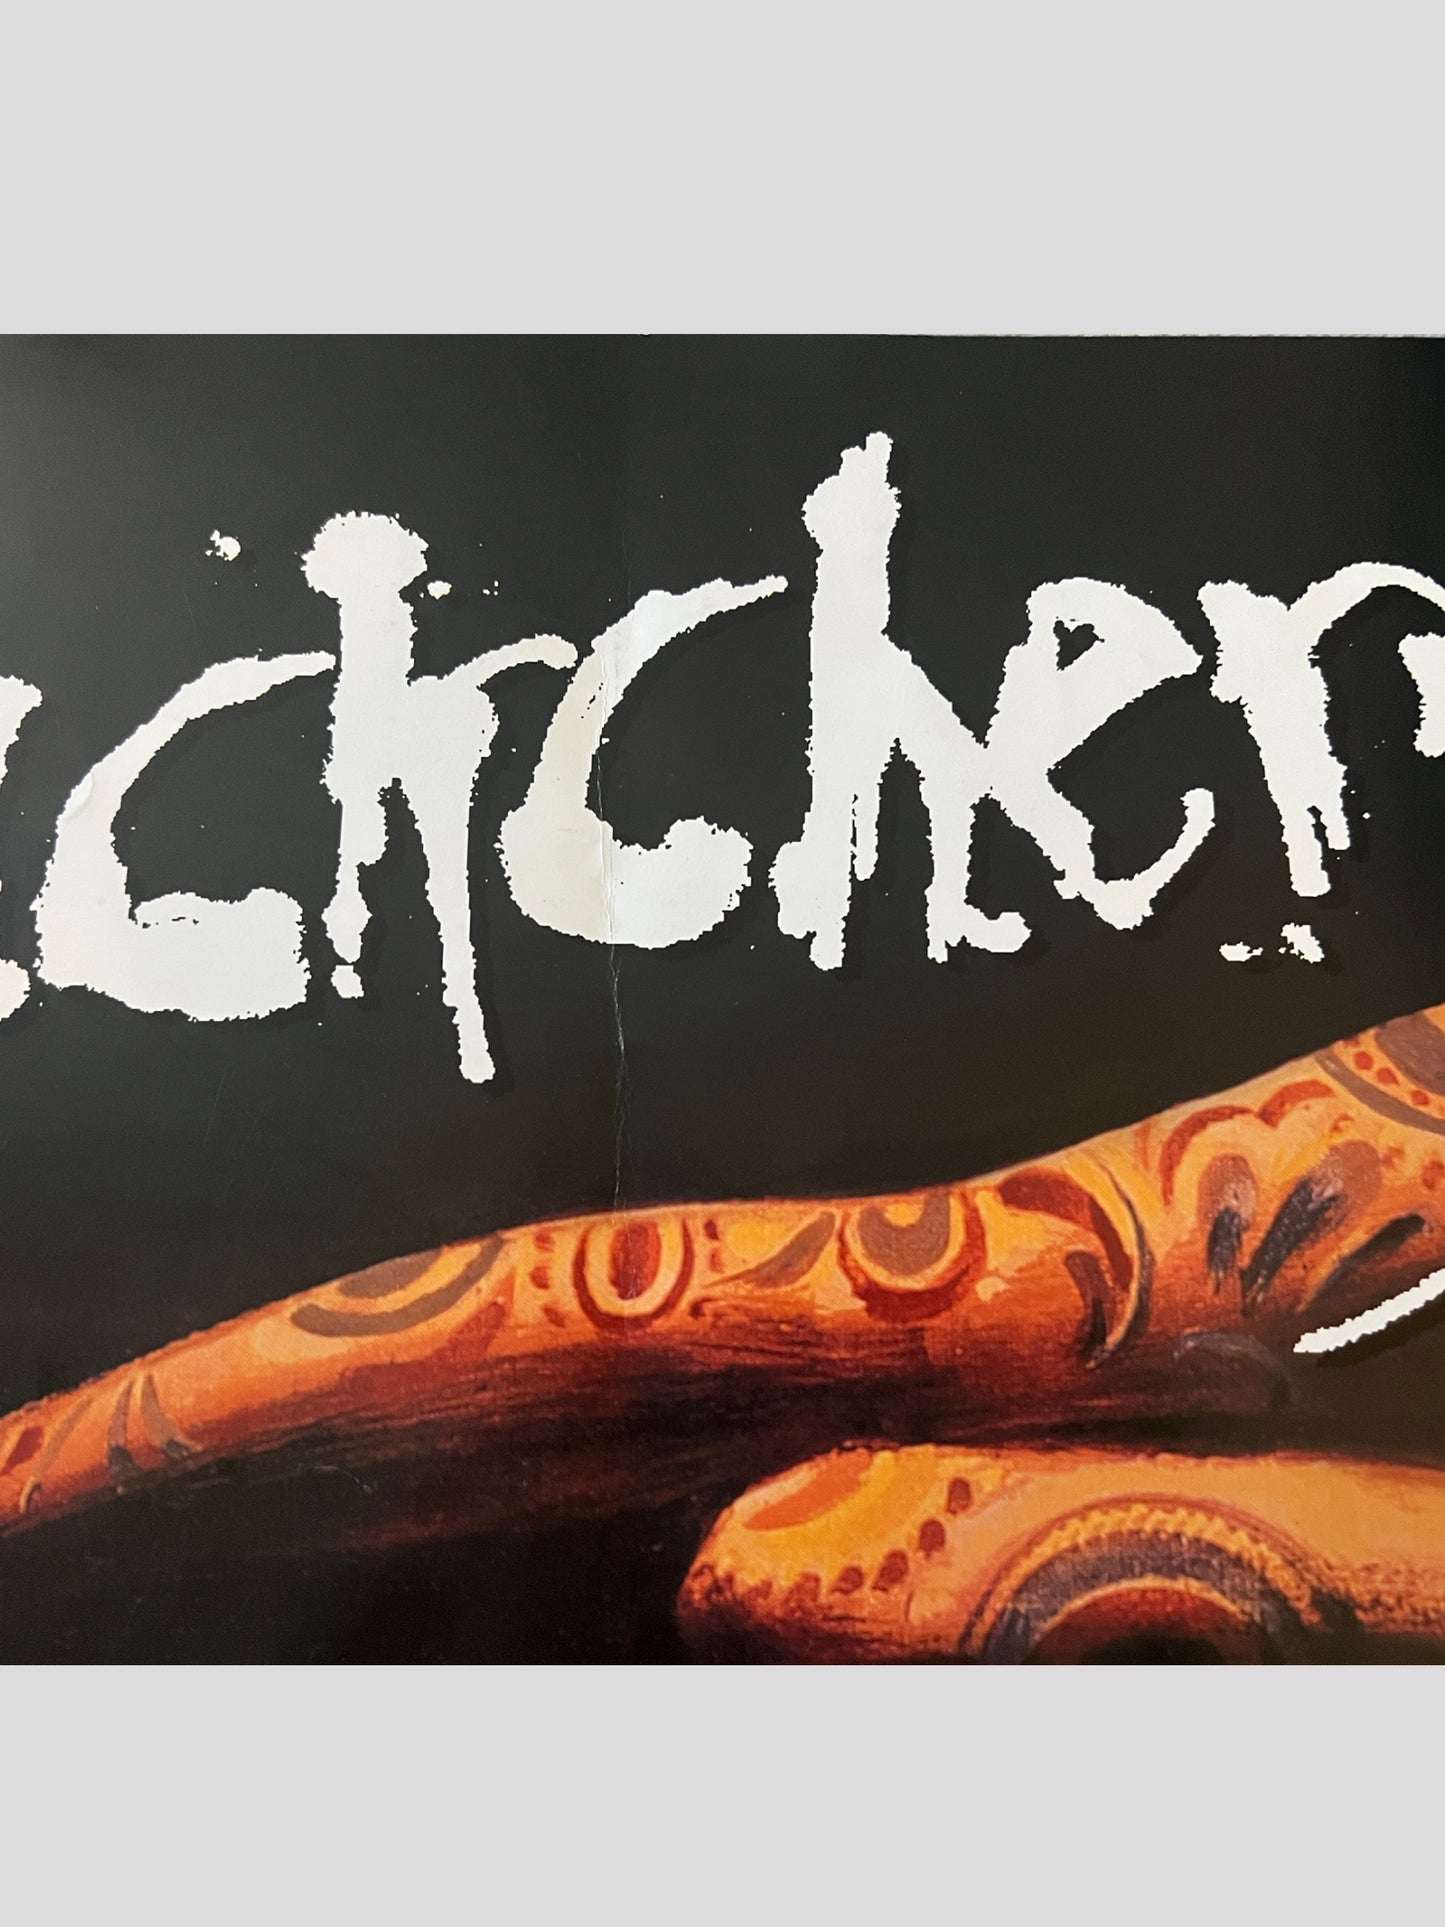 Buckcherry Double Sided Promo Poster 12 x 24 inches